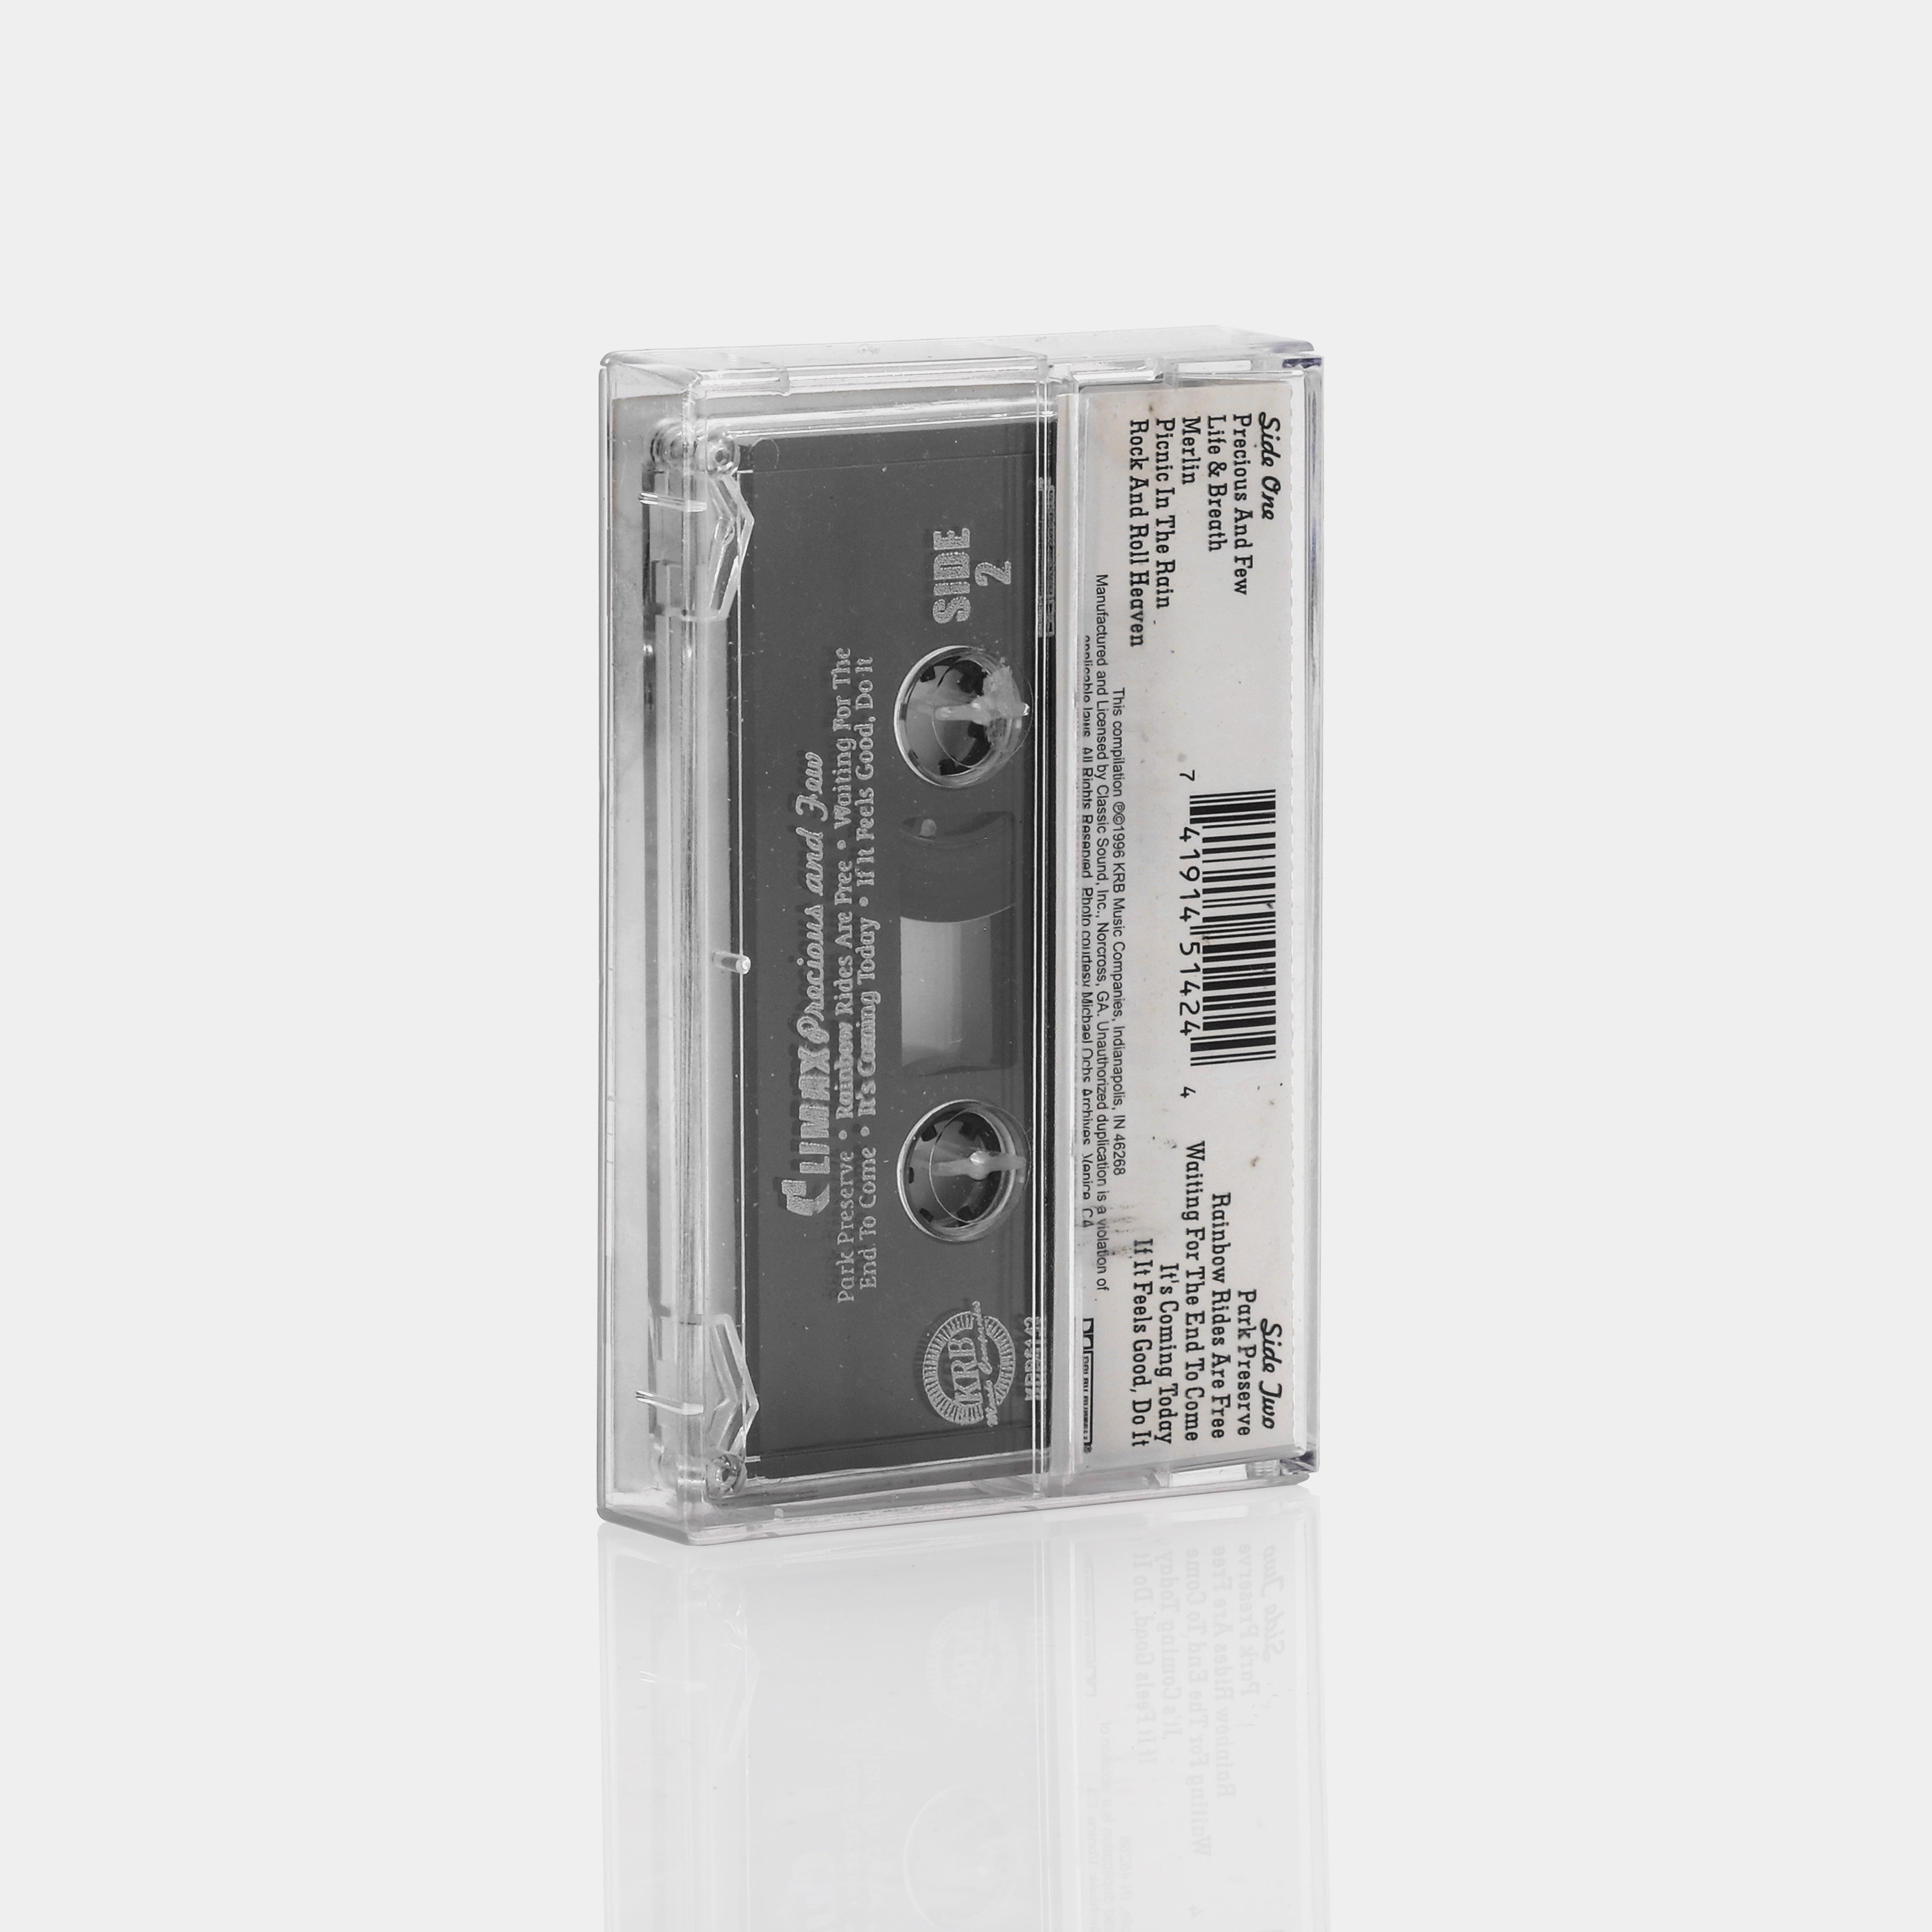 Climax - Precious and Few Cassette Tape